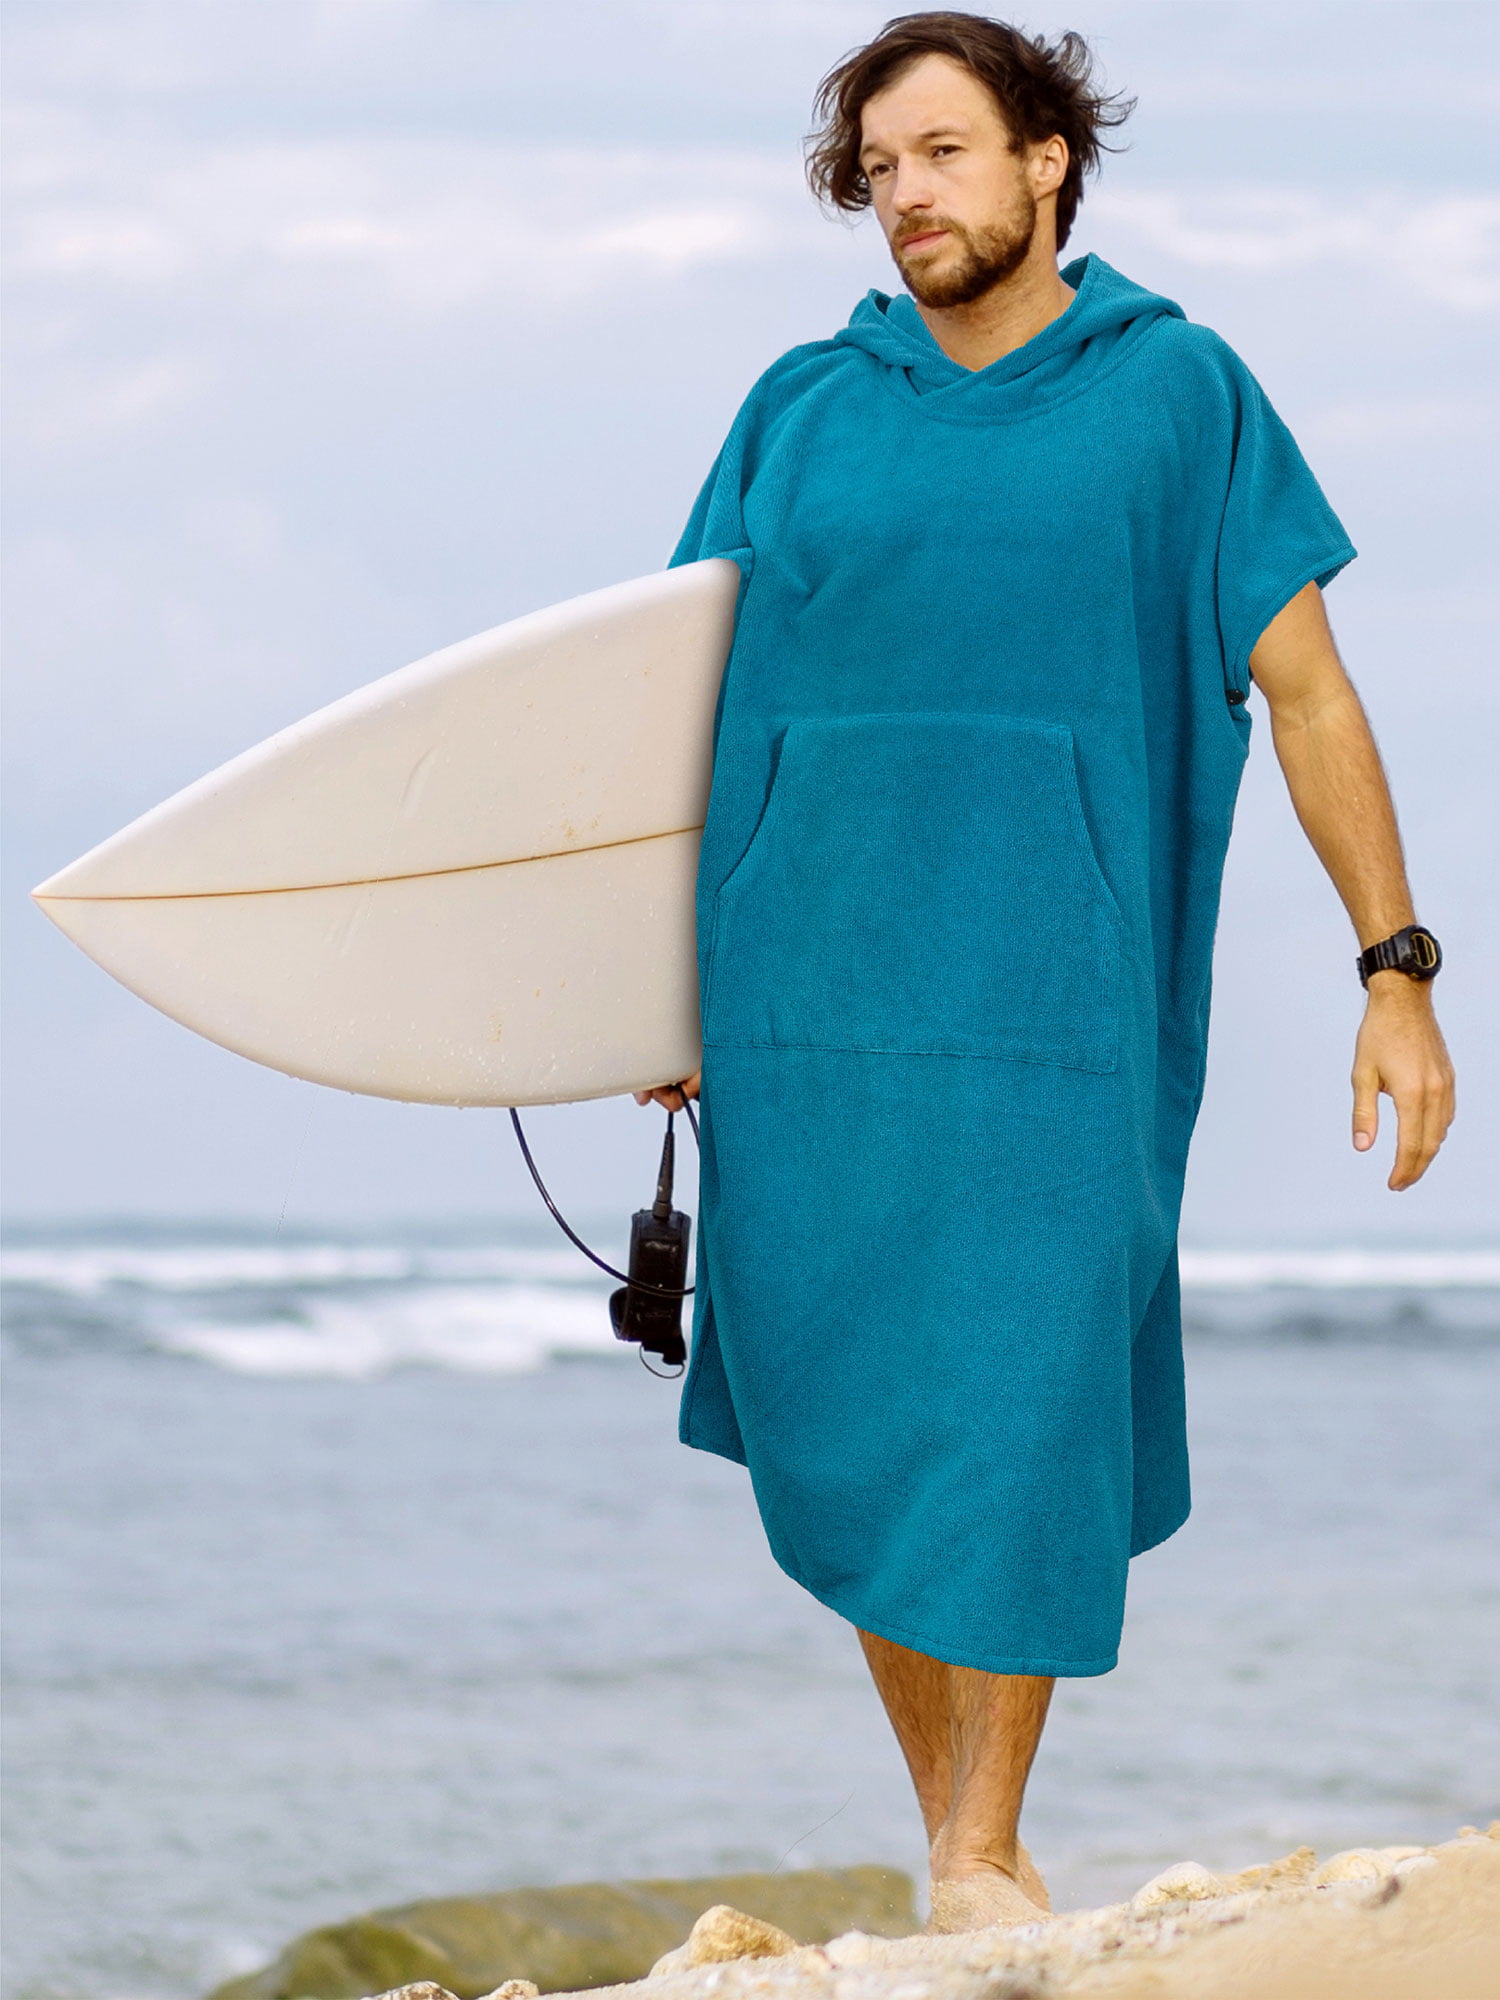 SUN CUBE Surf Poncho Changing Robe with Hood, Thick Quick Dry Microfiber  Wetsuit Changing Towel for Surfing Beach Swim Outdoor Sports Men, Absorbent  Wearable Towel Cover Up, Turquoise Sea Blue 